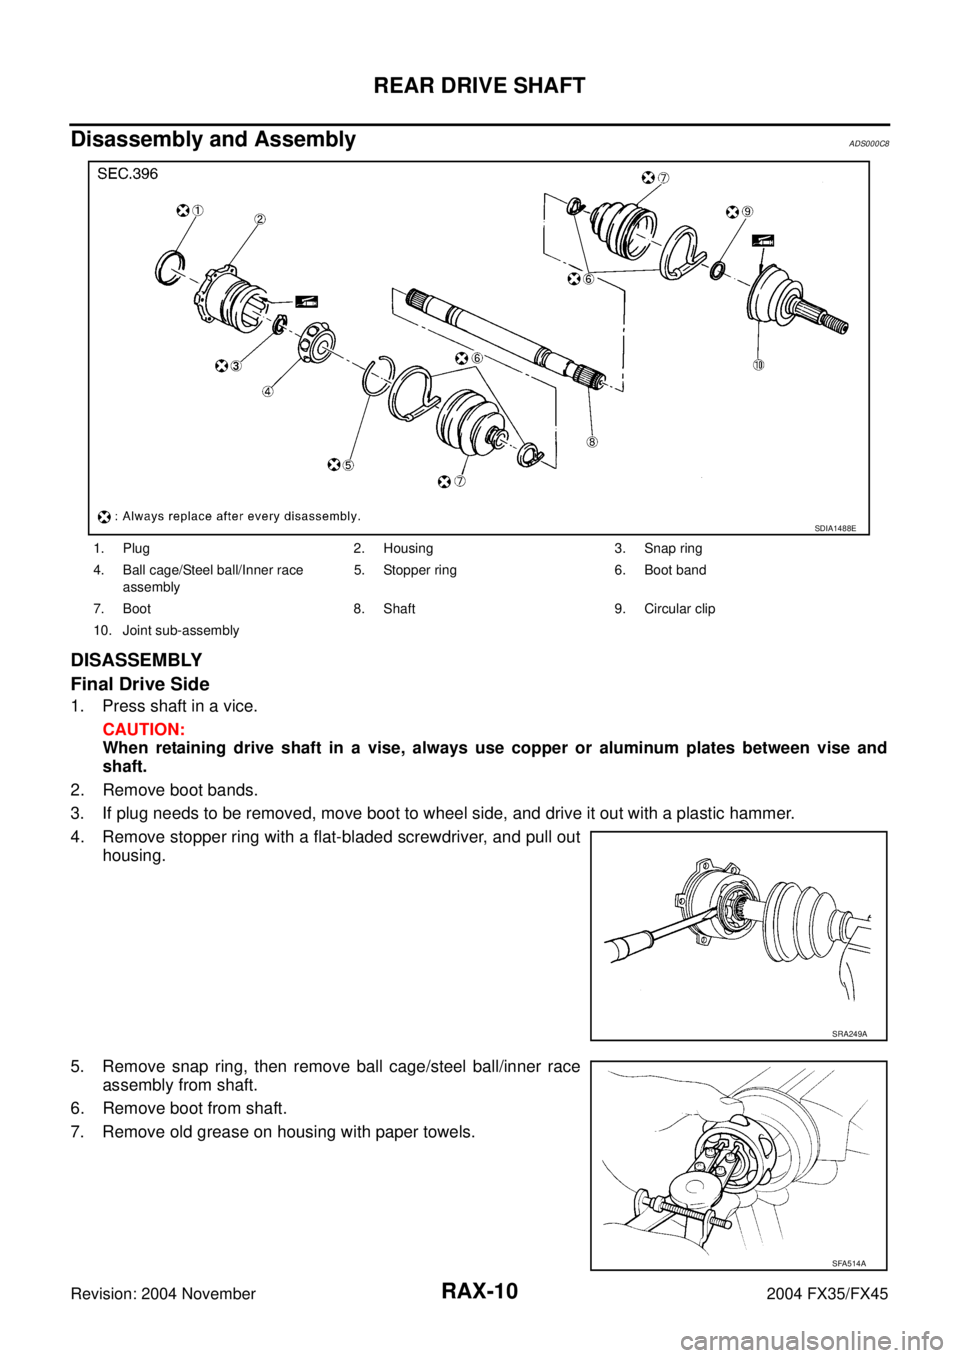 INFINITI FX35 2004  Service Manual RAX-10
REAR DRIVE SHAFT
Revision: 2004 November 2004 FX35/FX45
Disassembly and AssemblyADS000C8
DISASSEMBLY
Final Drive Side
1. Press shaft in a vice.
CAUTION:
When retaining drive shaft in a vise, al